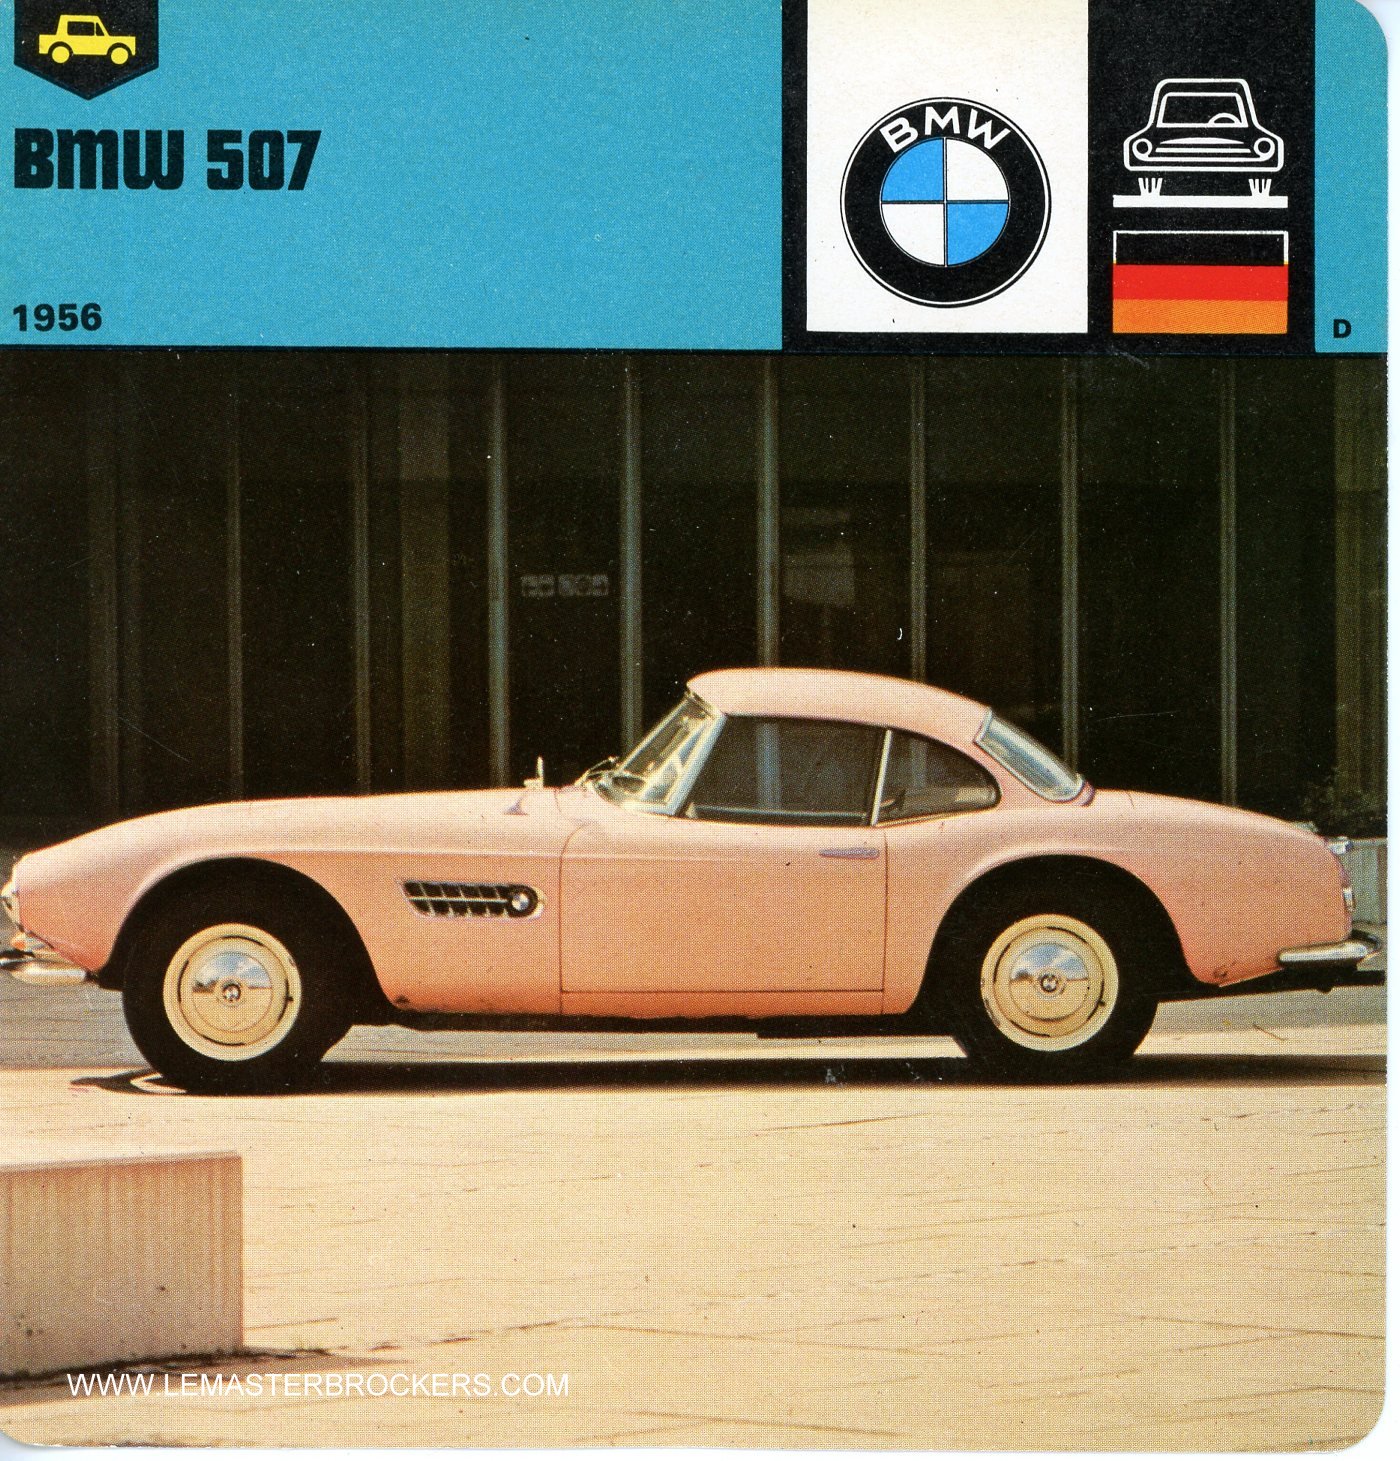 FICHE AUTO BMW 507 CARS-CARD LEMASTERBROCKERS